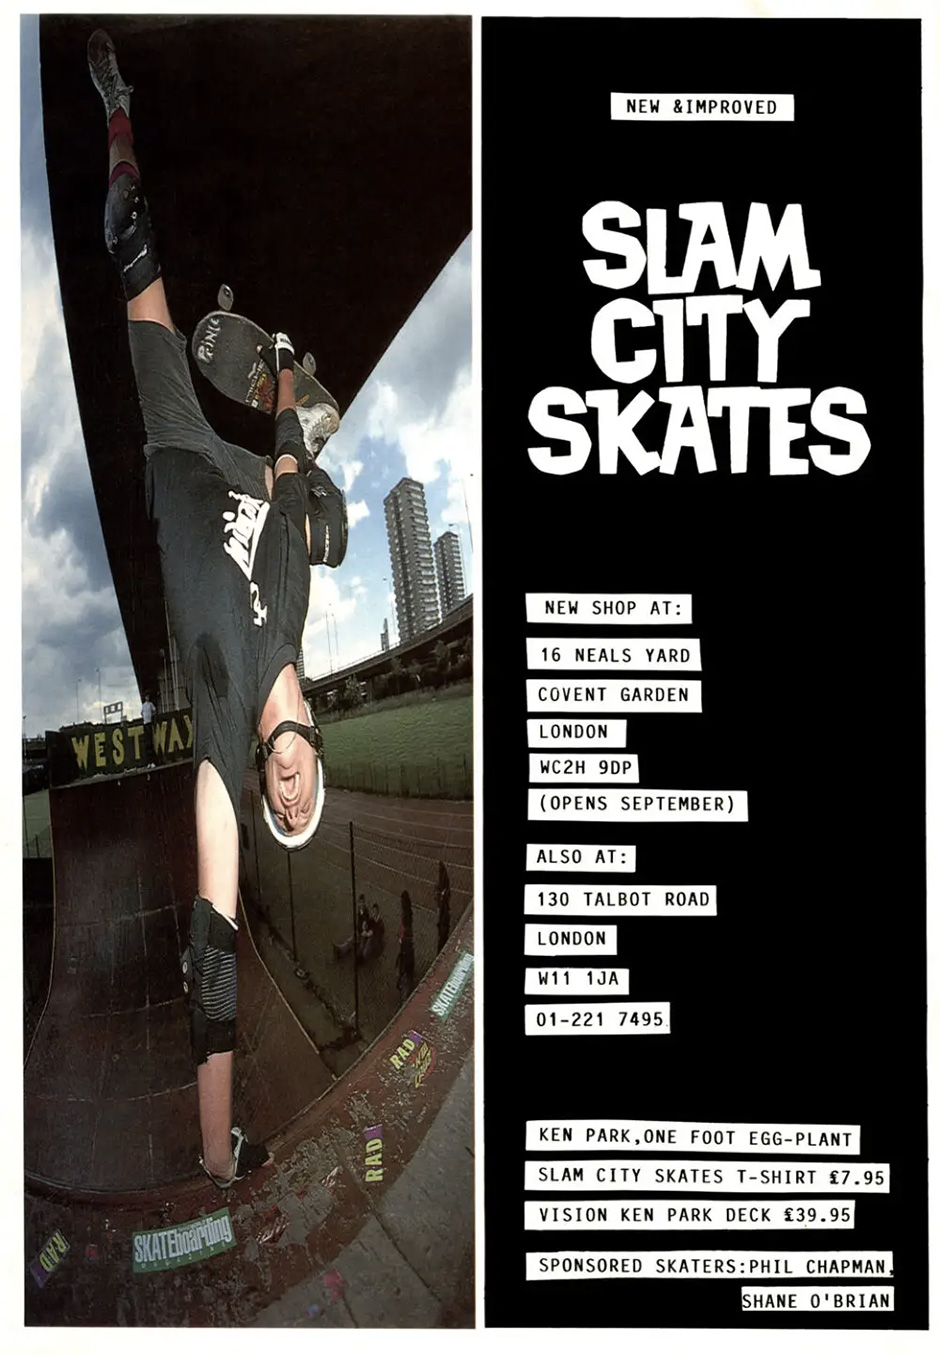 Ken Park at Latimer Road in an advert announcing the new Slam Covent Garden location in 1988